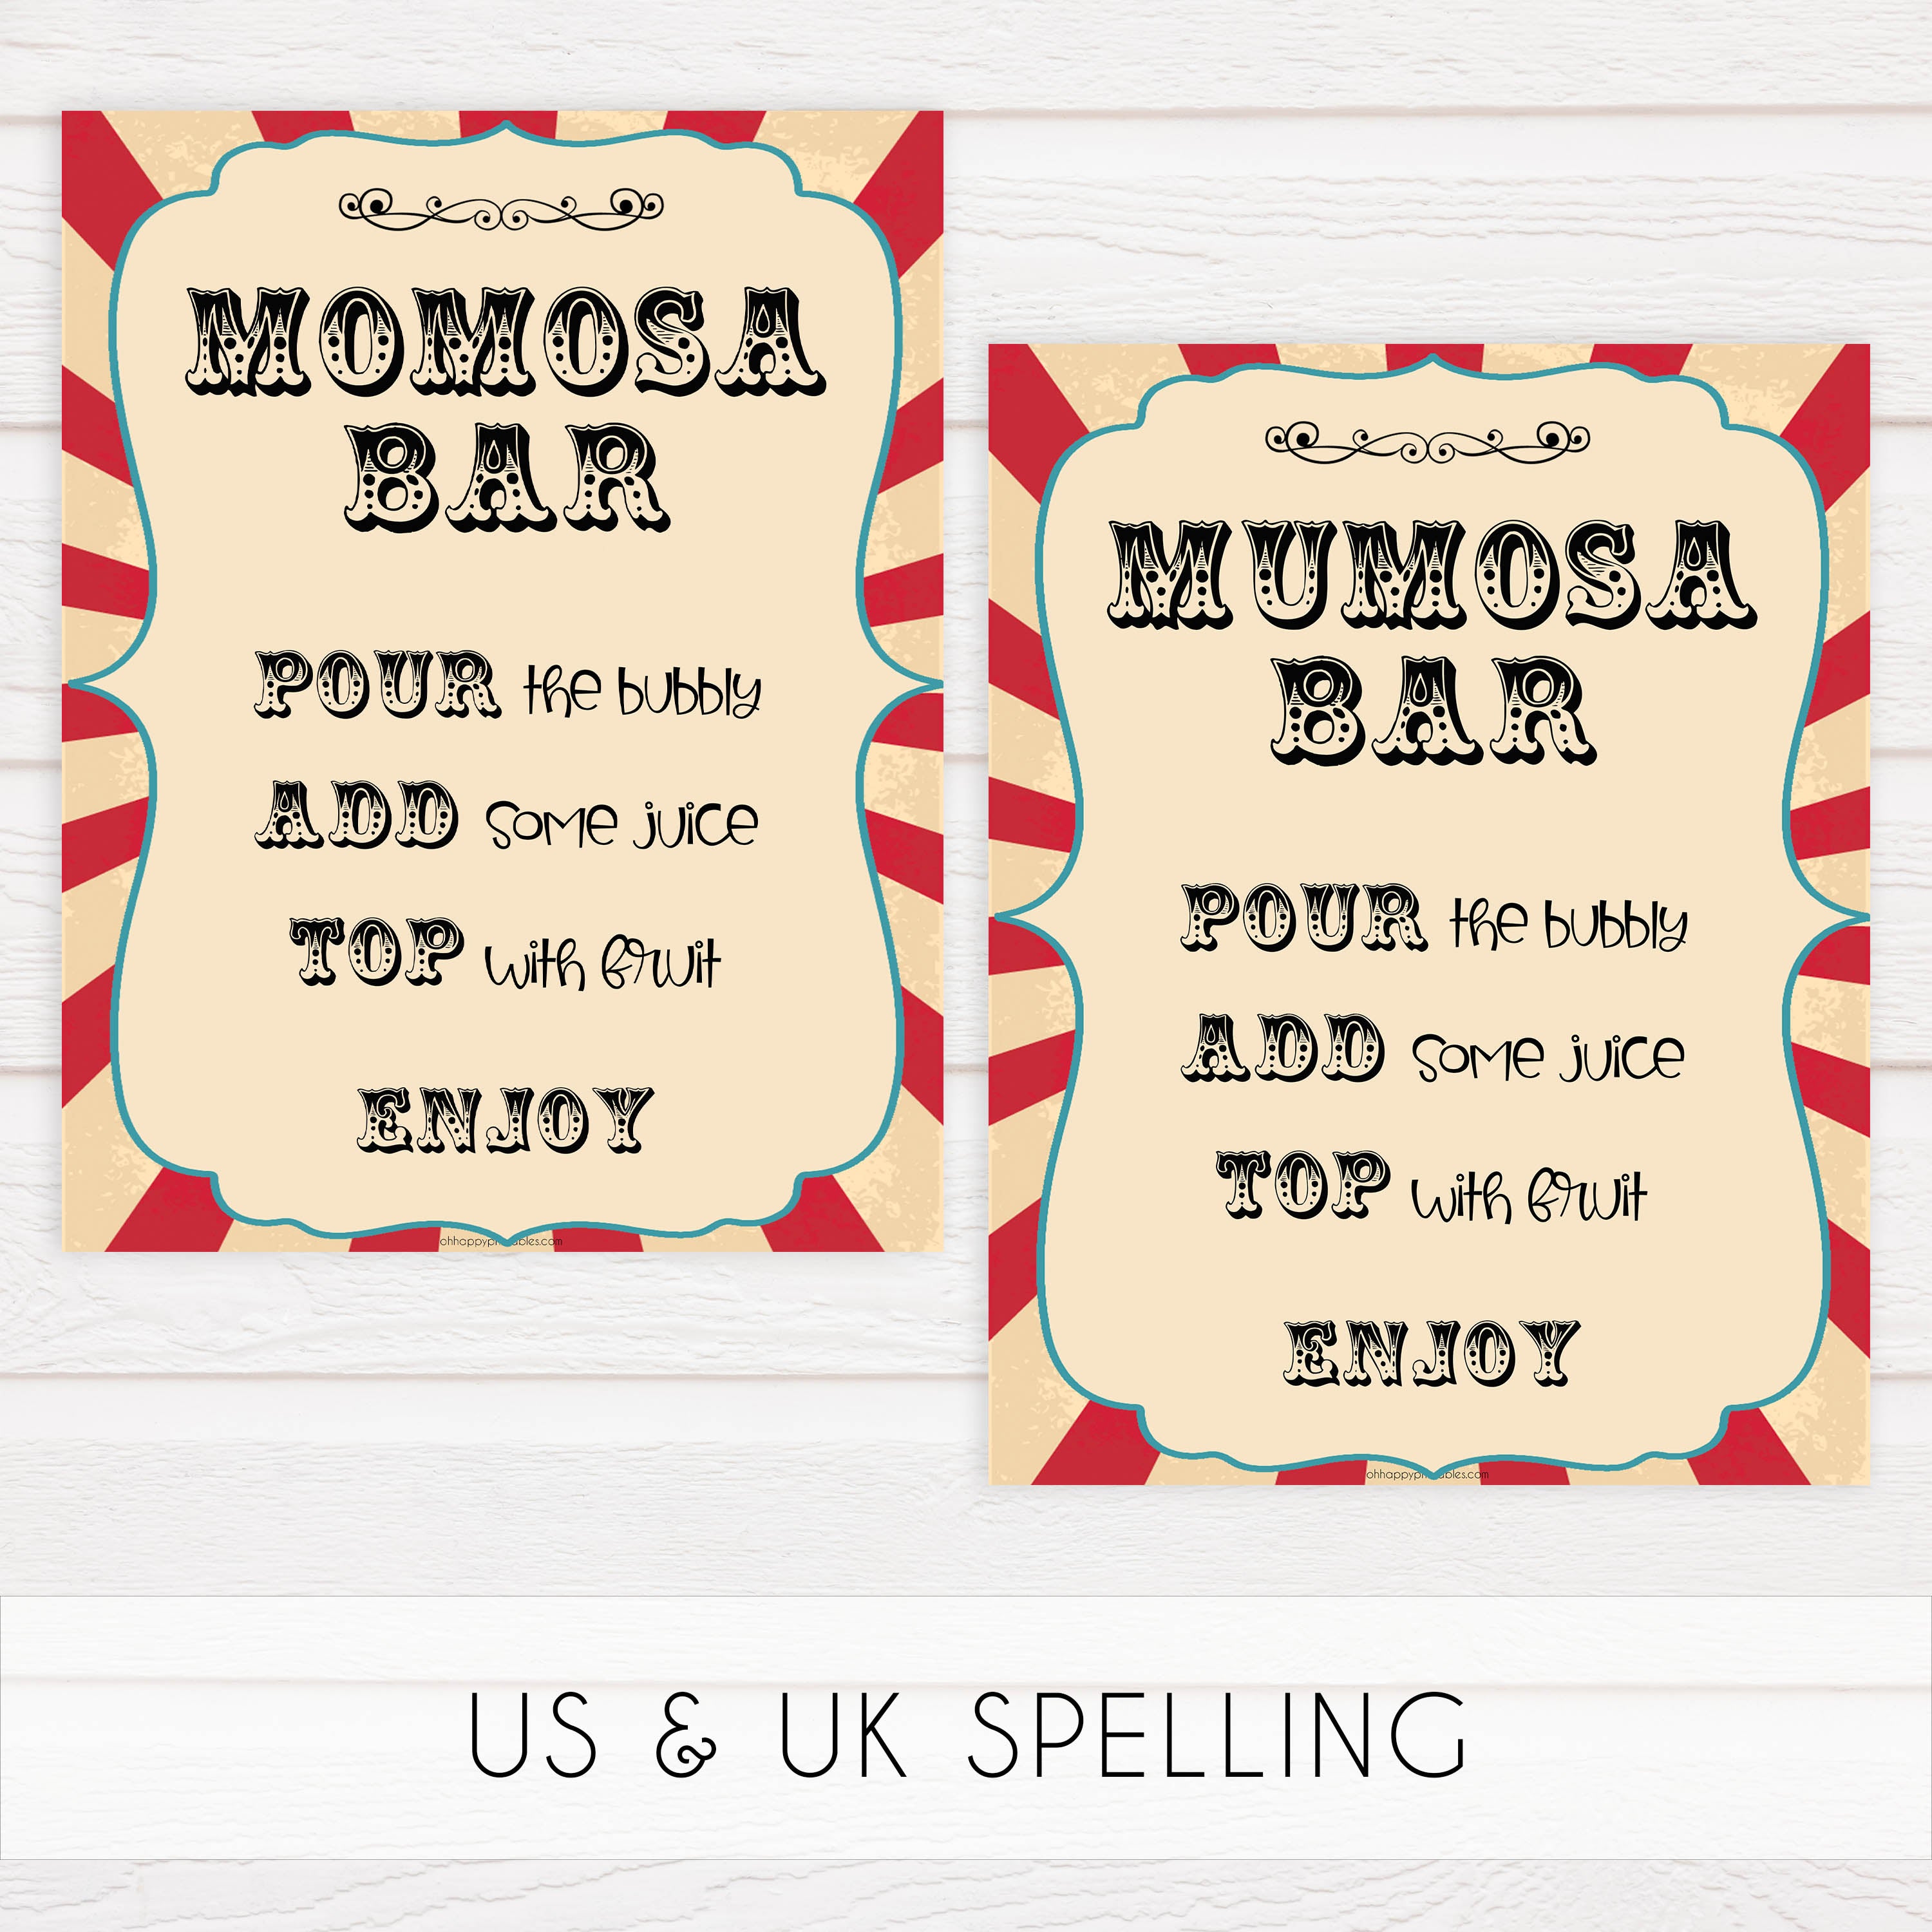 momsoa baby table sign, momosa baby decor sign,  Circus baby decor, printable baby table signs, printable baby decor, carnival table signs, fun baby signs, circus fun baby table signs